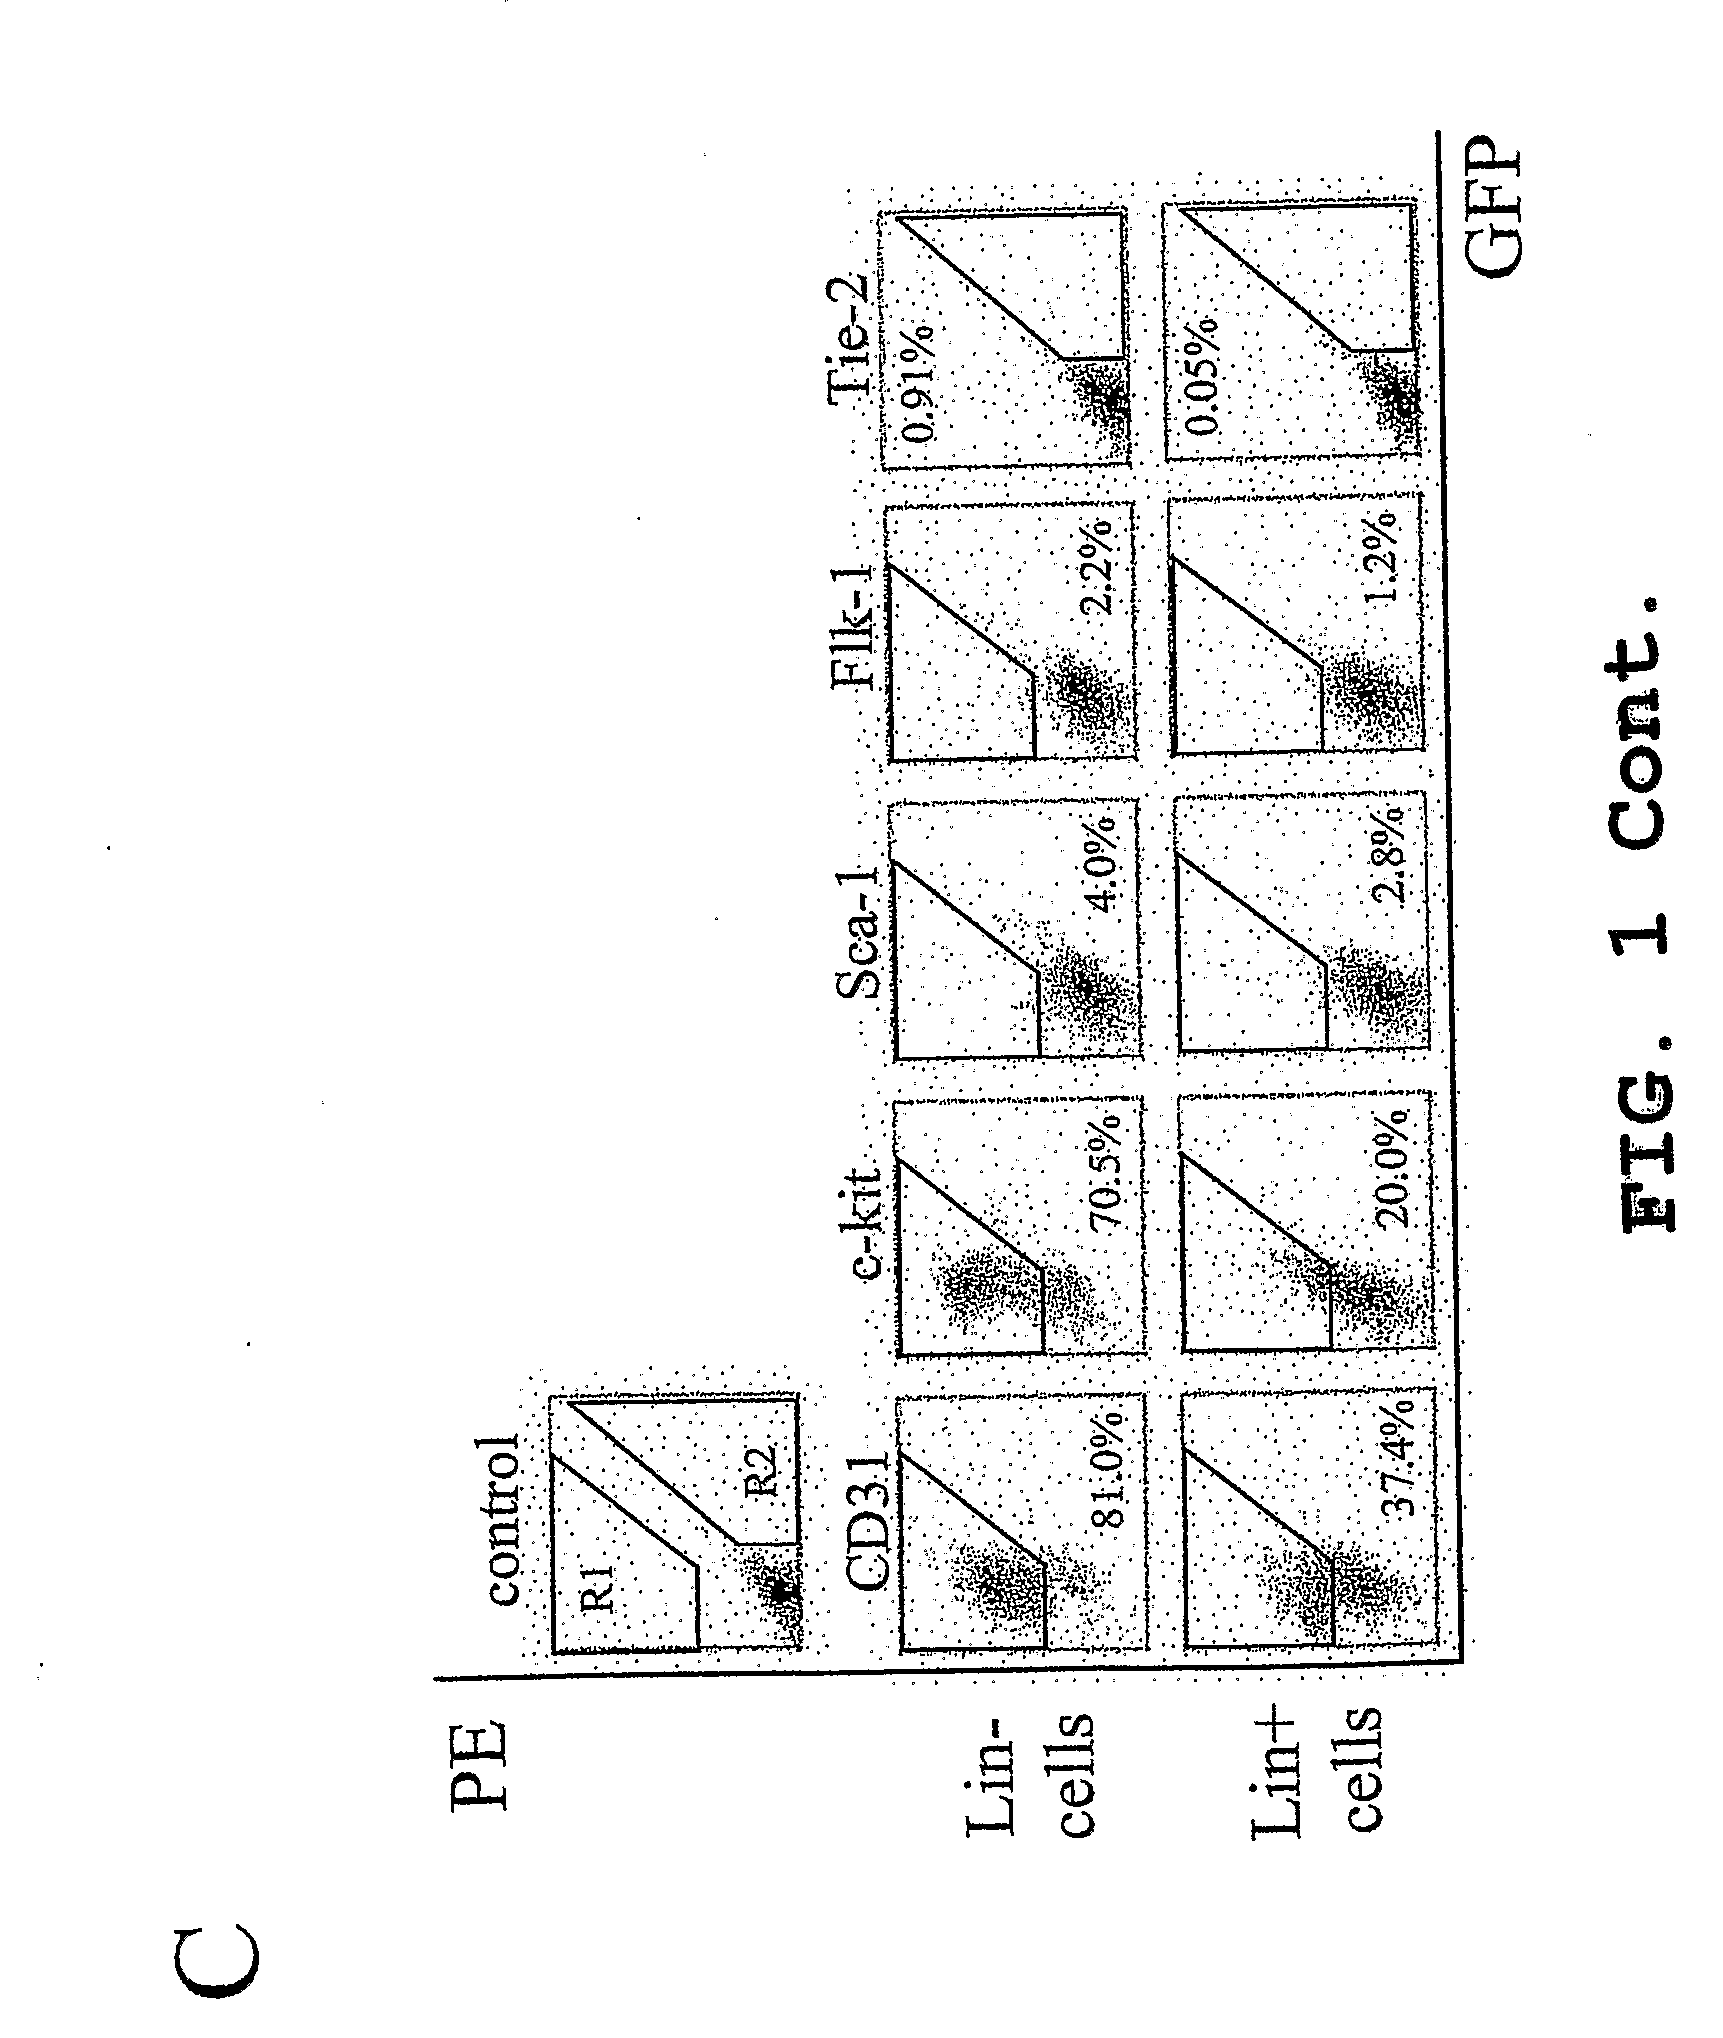 Method for the Treatment of Retinopathy of Prematurity and Related Retinopathic Diseases